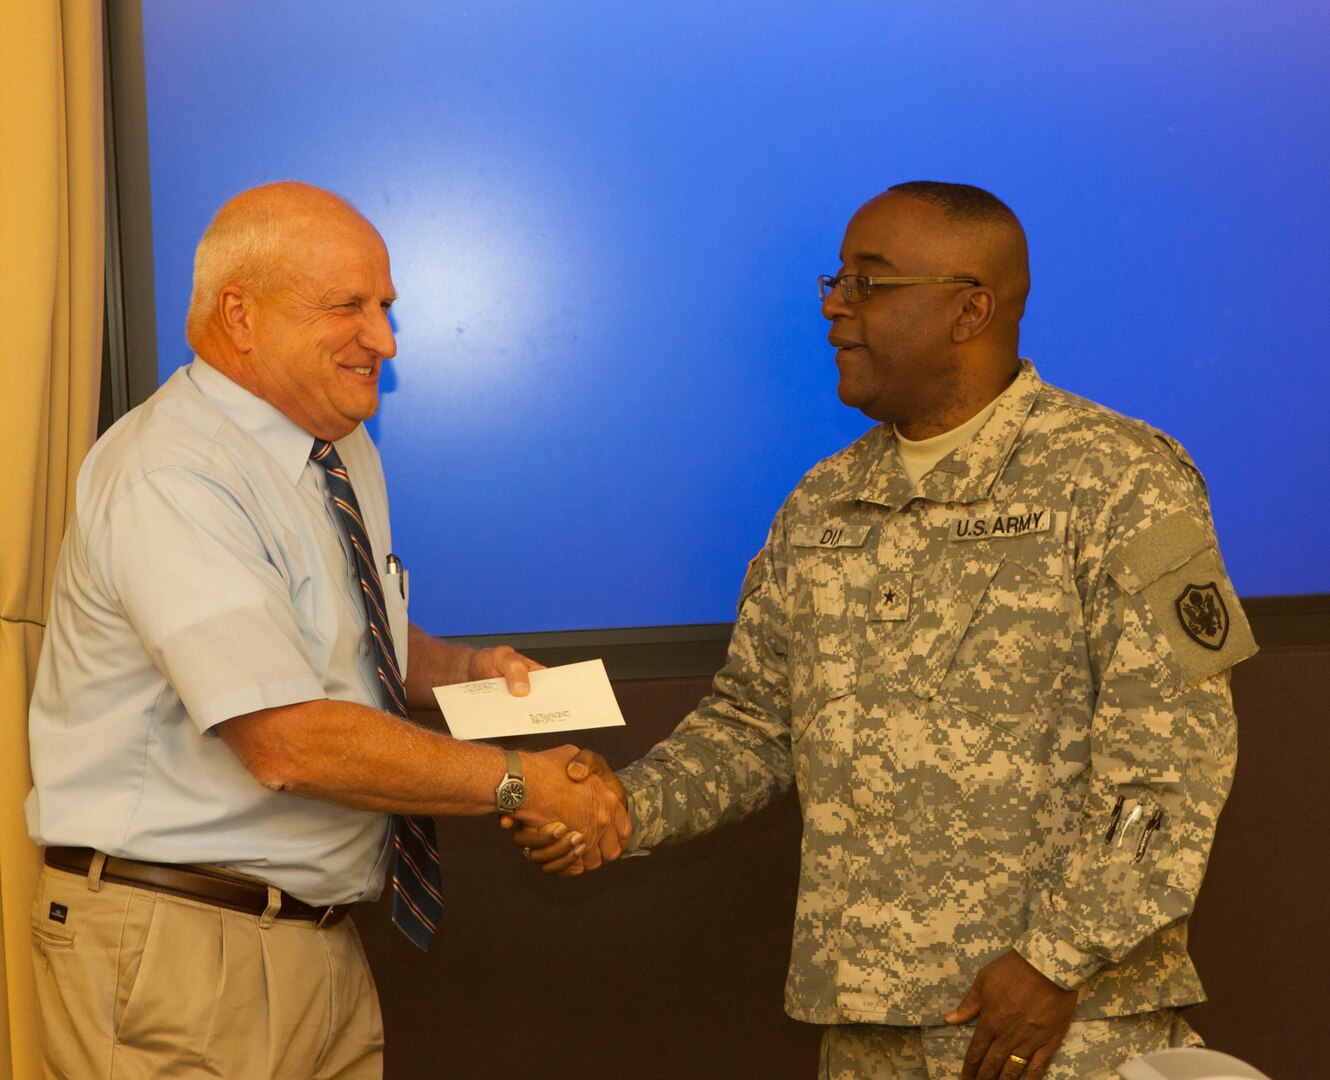 DLA Distribution commander Brig. Gen. Richard Dix presents ALU course instructor Lee Holland with a coin for his years of support towards America’s logisticians.